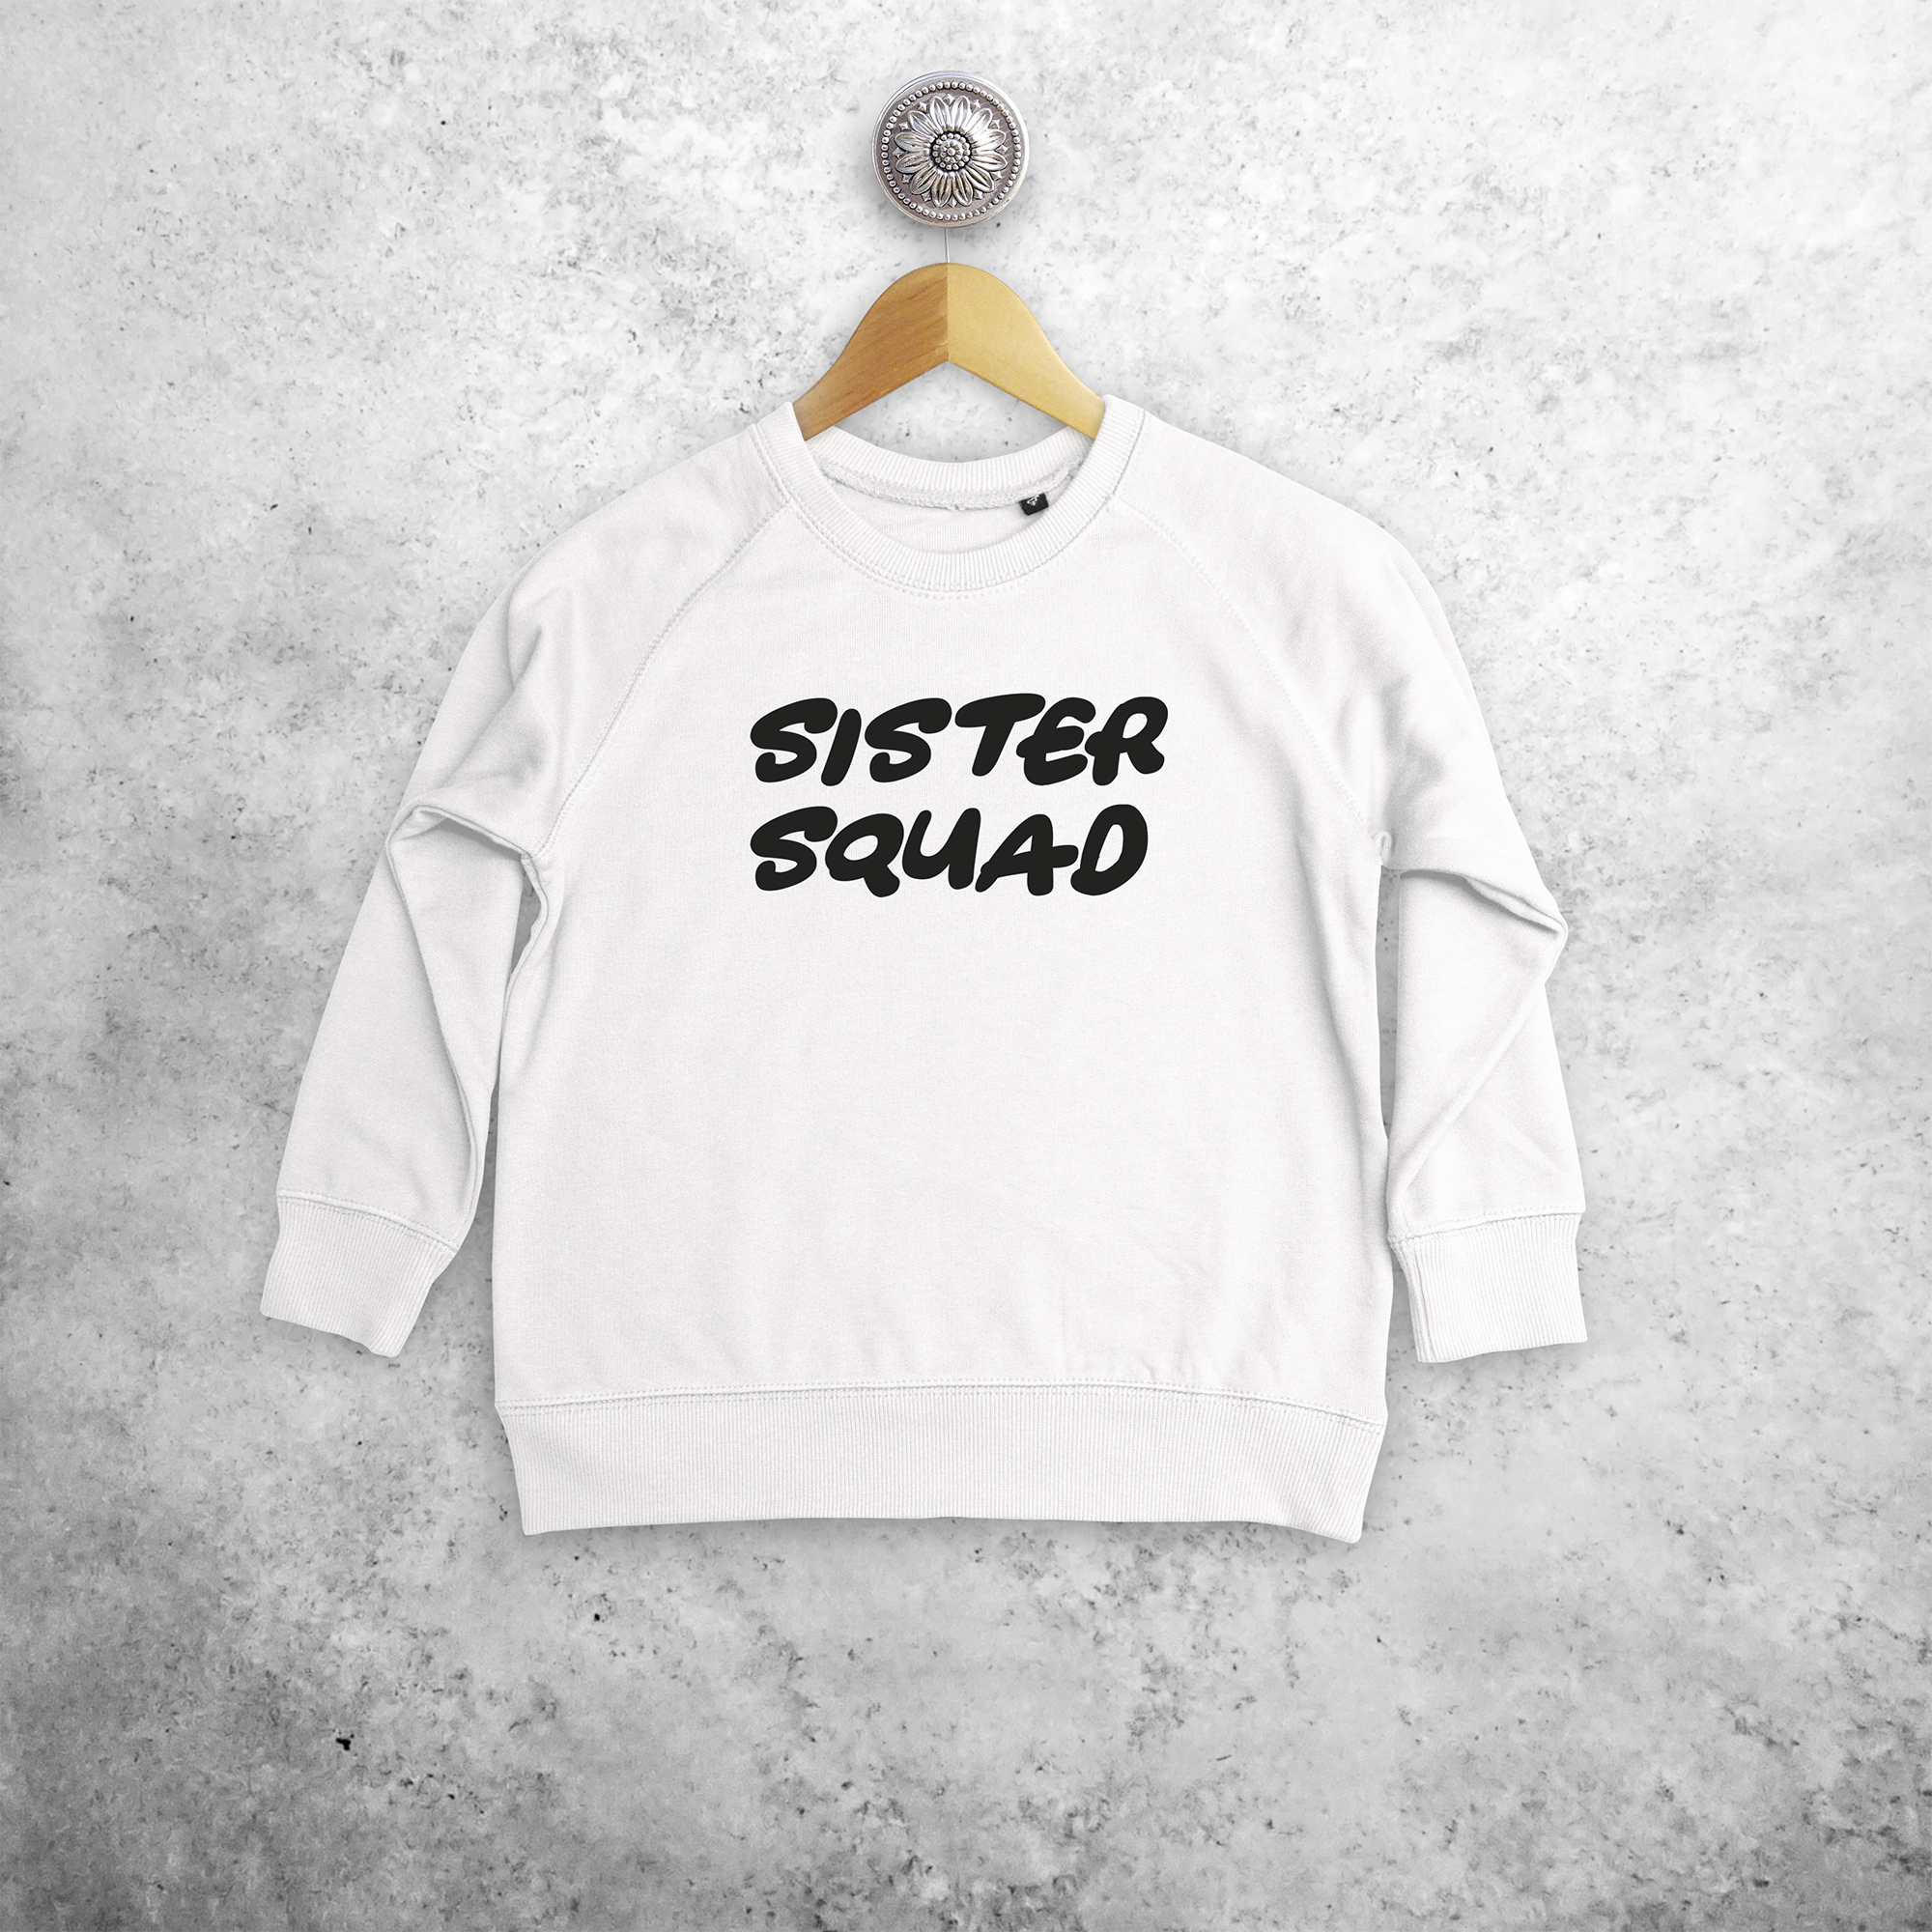 'Sister squad' kids sweater